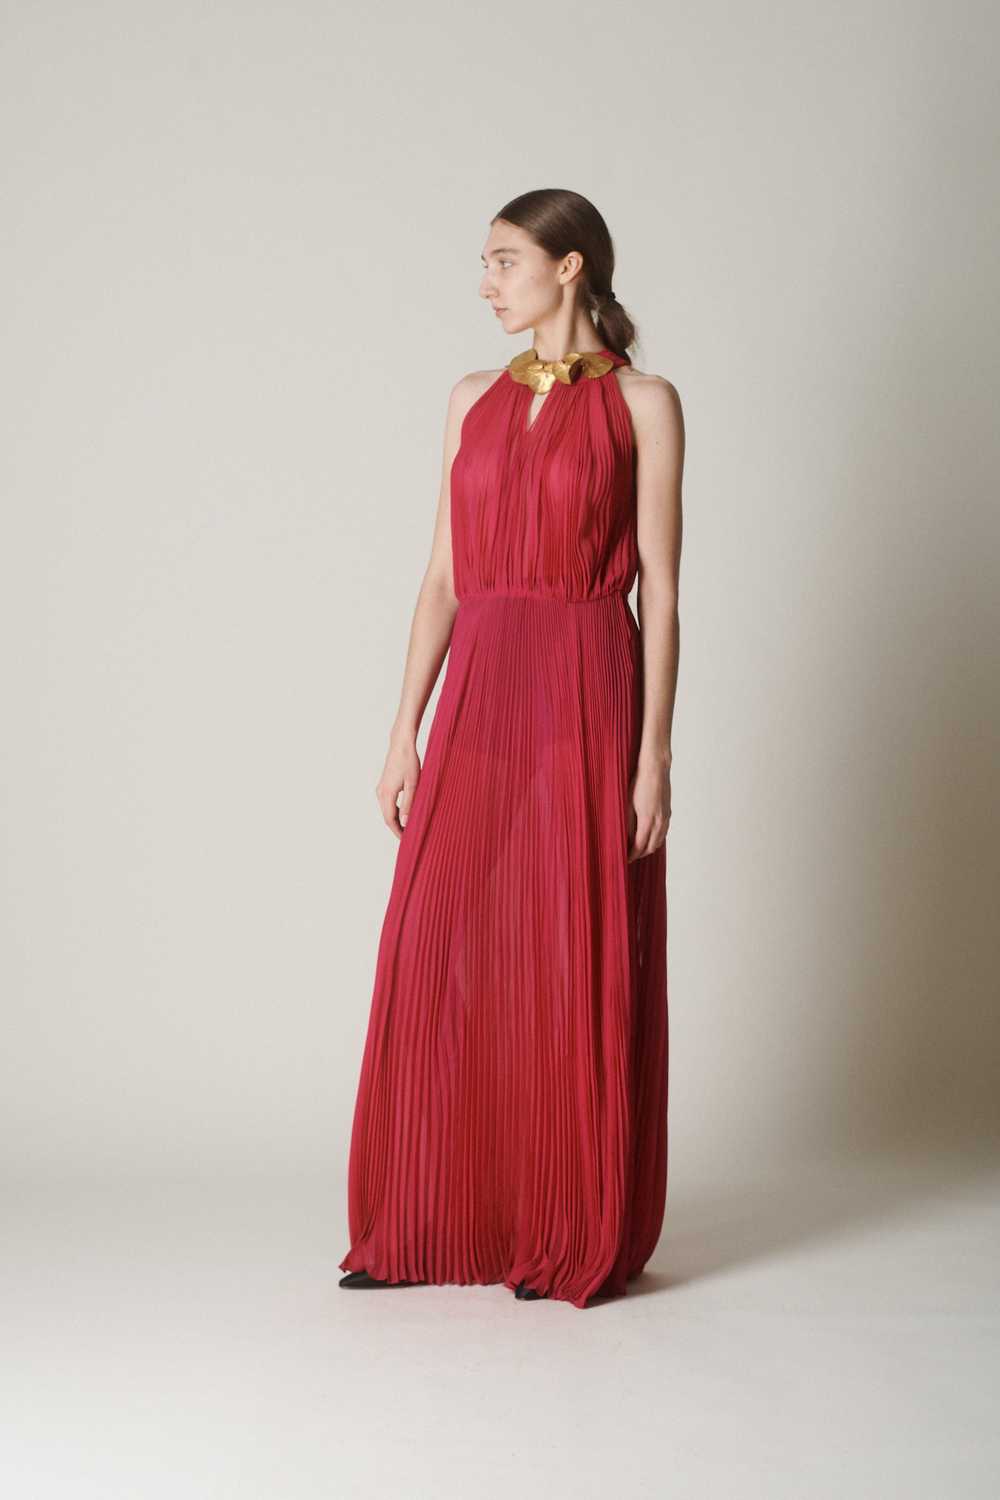 Vintage Pleated Chiffon Gown - image 2